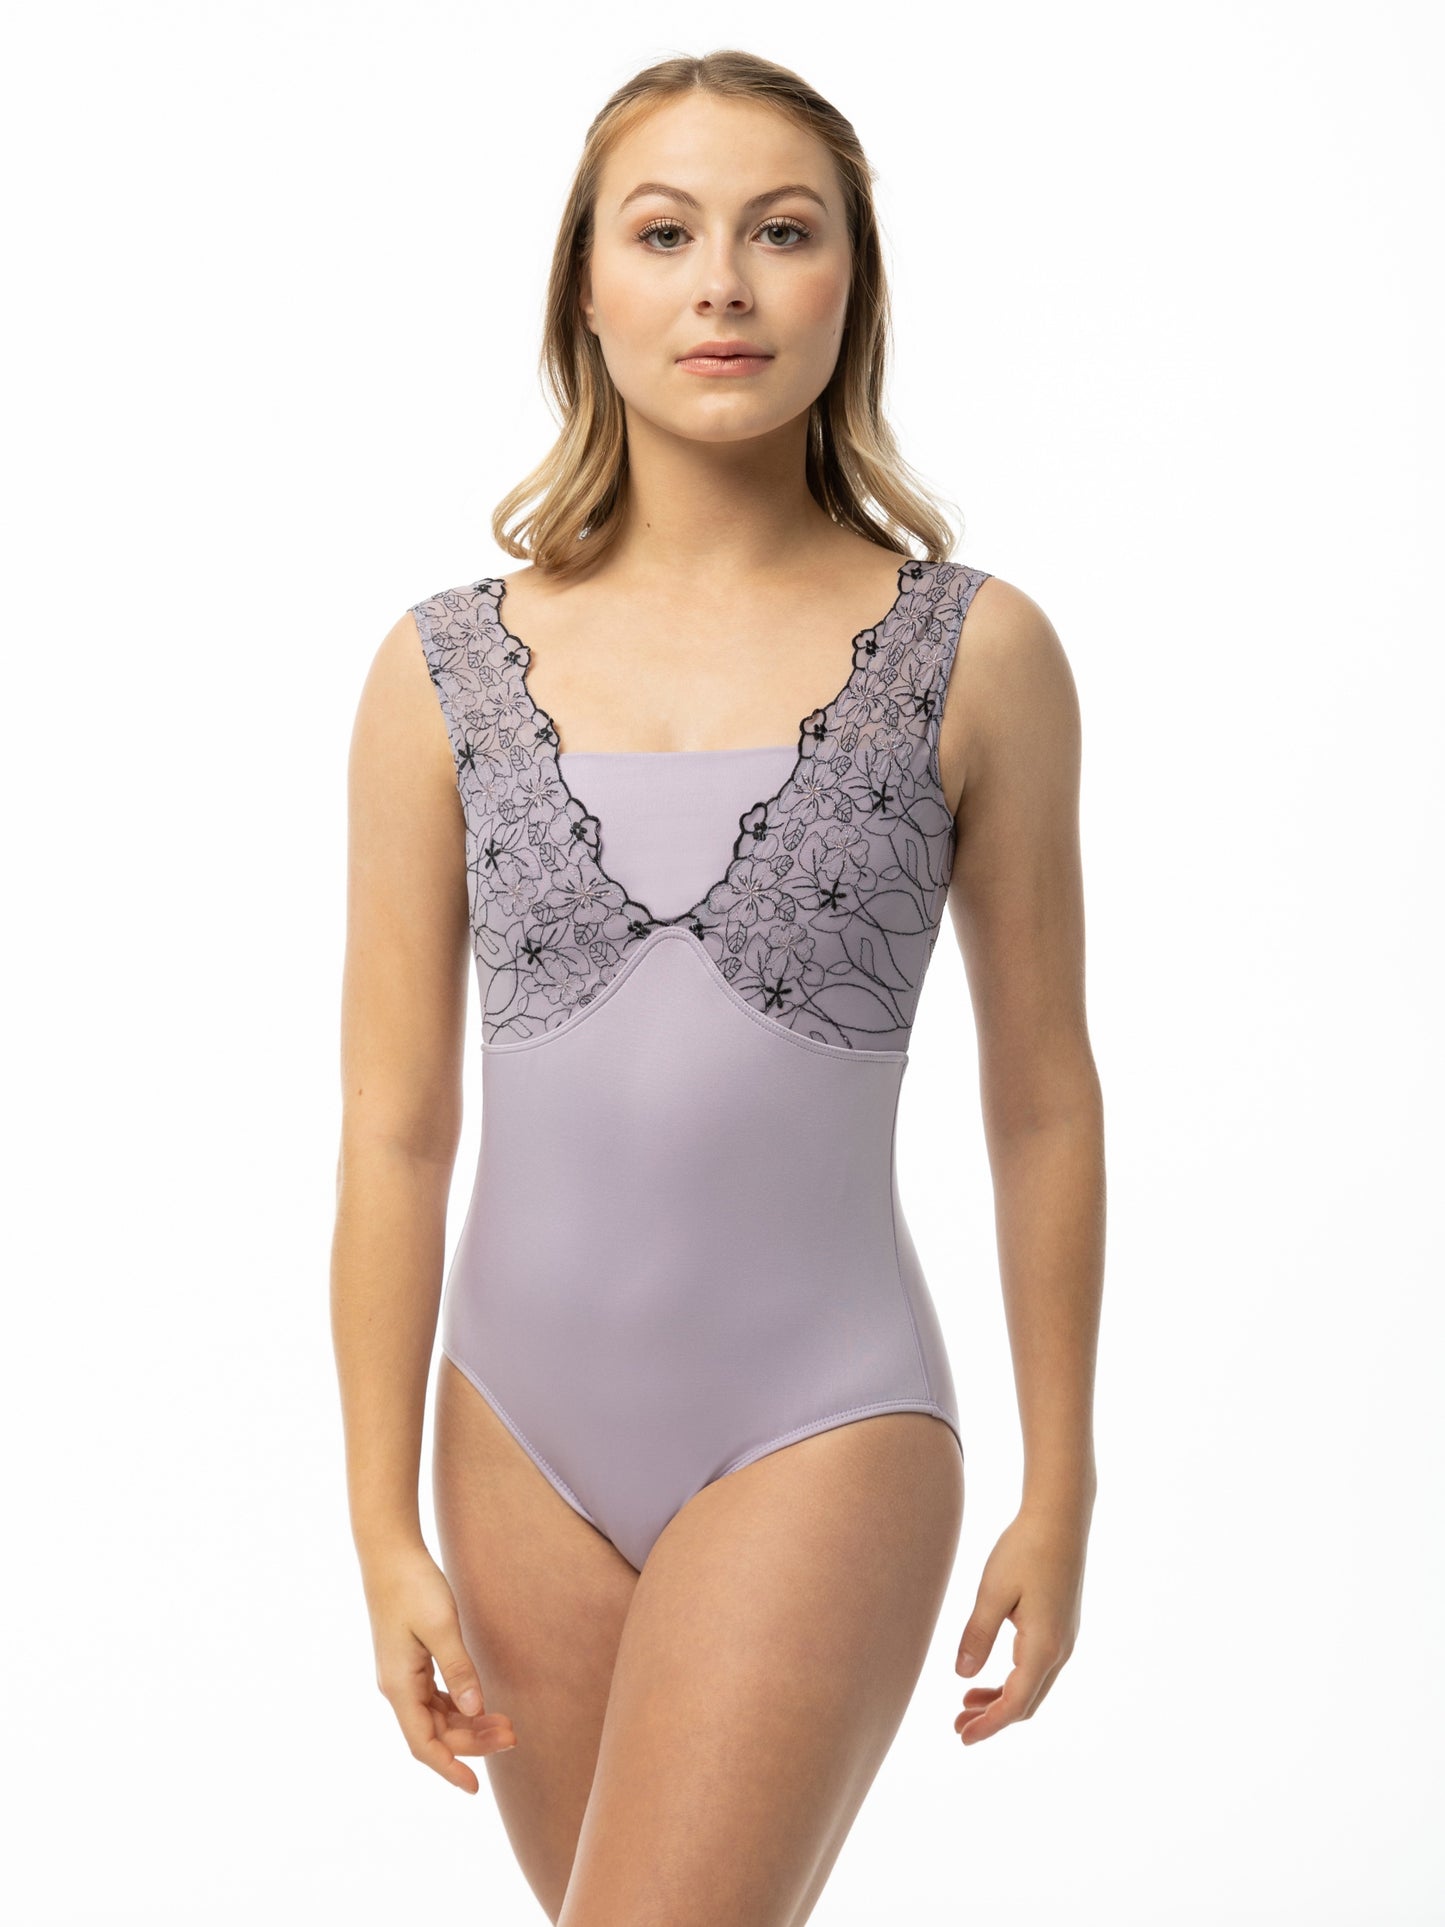 Stormy Overlay Tank Adult Leotard- 2575A